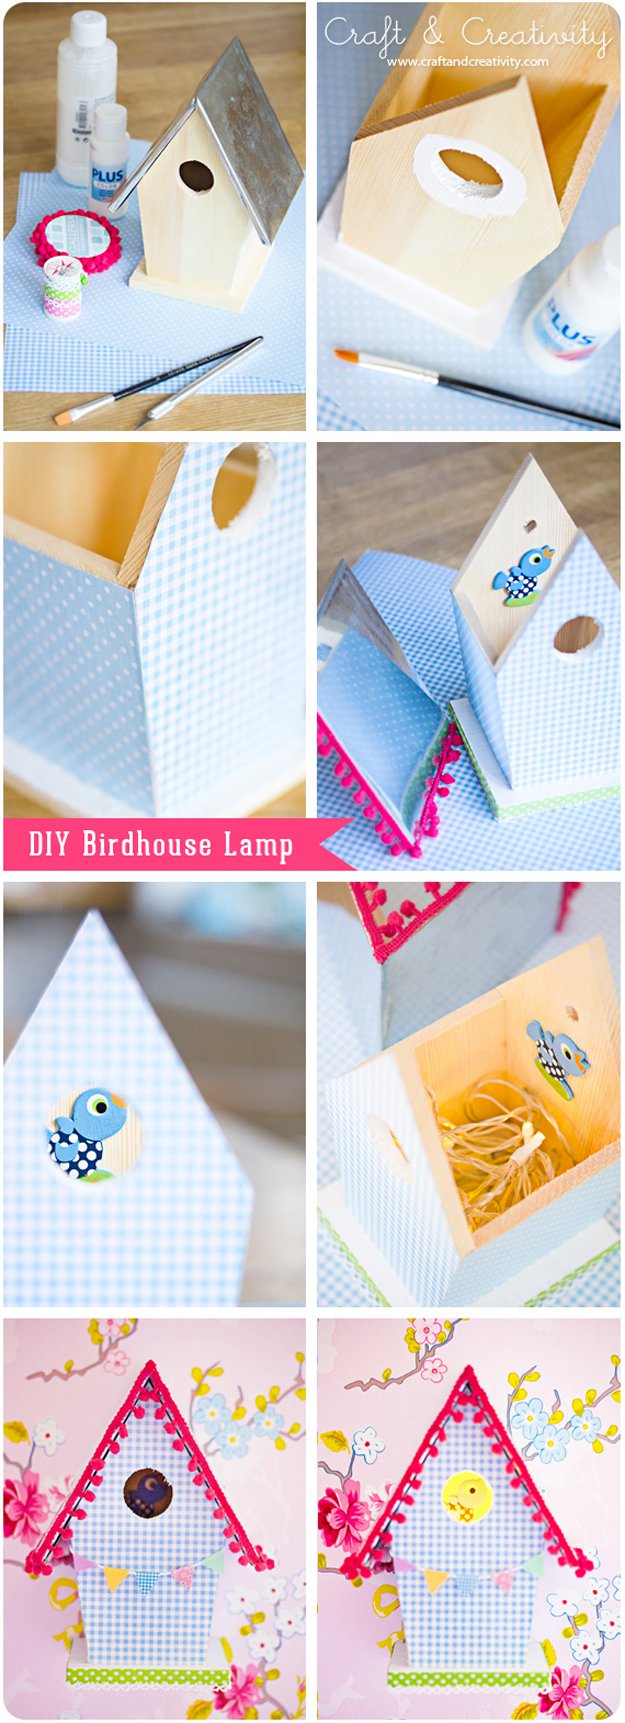 Washi Tape Crafts - DIY Birdhouse Lamp - Wall Art, Frames, Cards, Pencils, Room Decor and DIY Gifts, Back To School Supplies - Creative, Fun Craft Ideas for Teens, Tweens and Teenagers - Step by Step Tutorials and Instructions #washitape #crafts #cheapcrafts #teencrafts